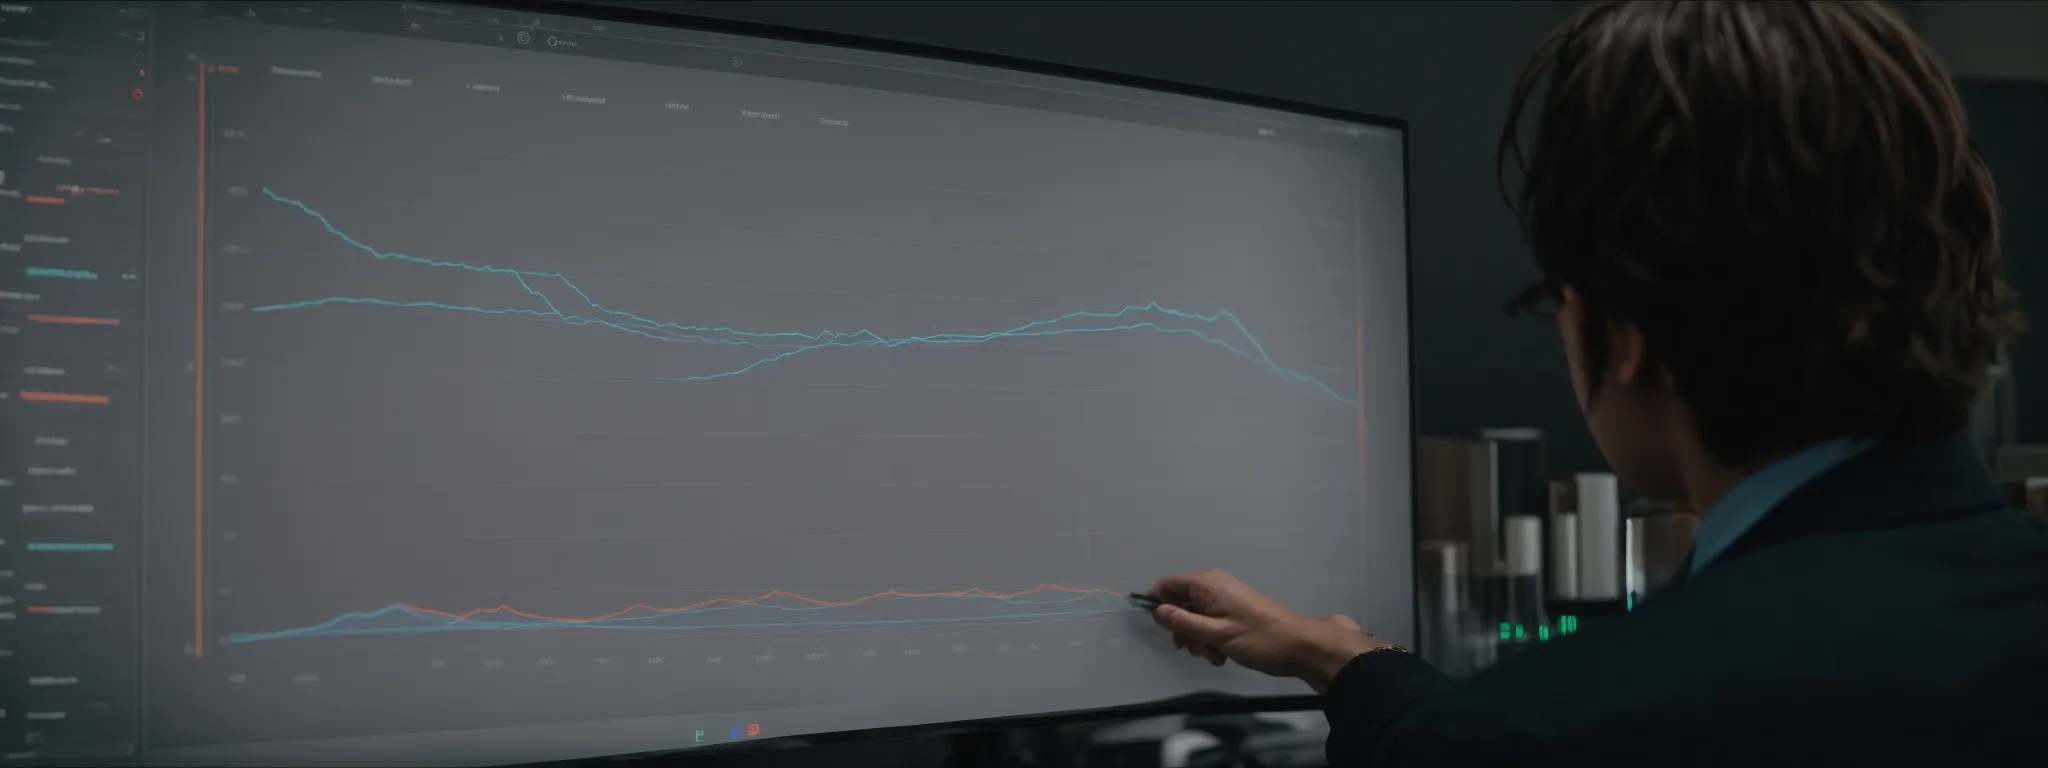 a person analyzing a graph on a screen showing search trend data.